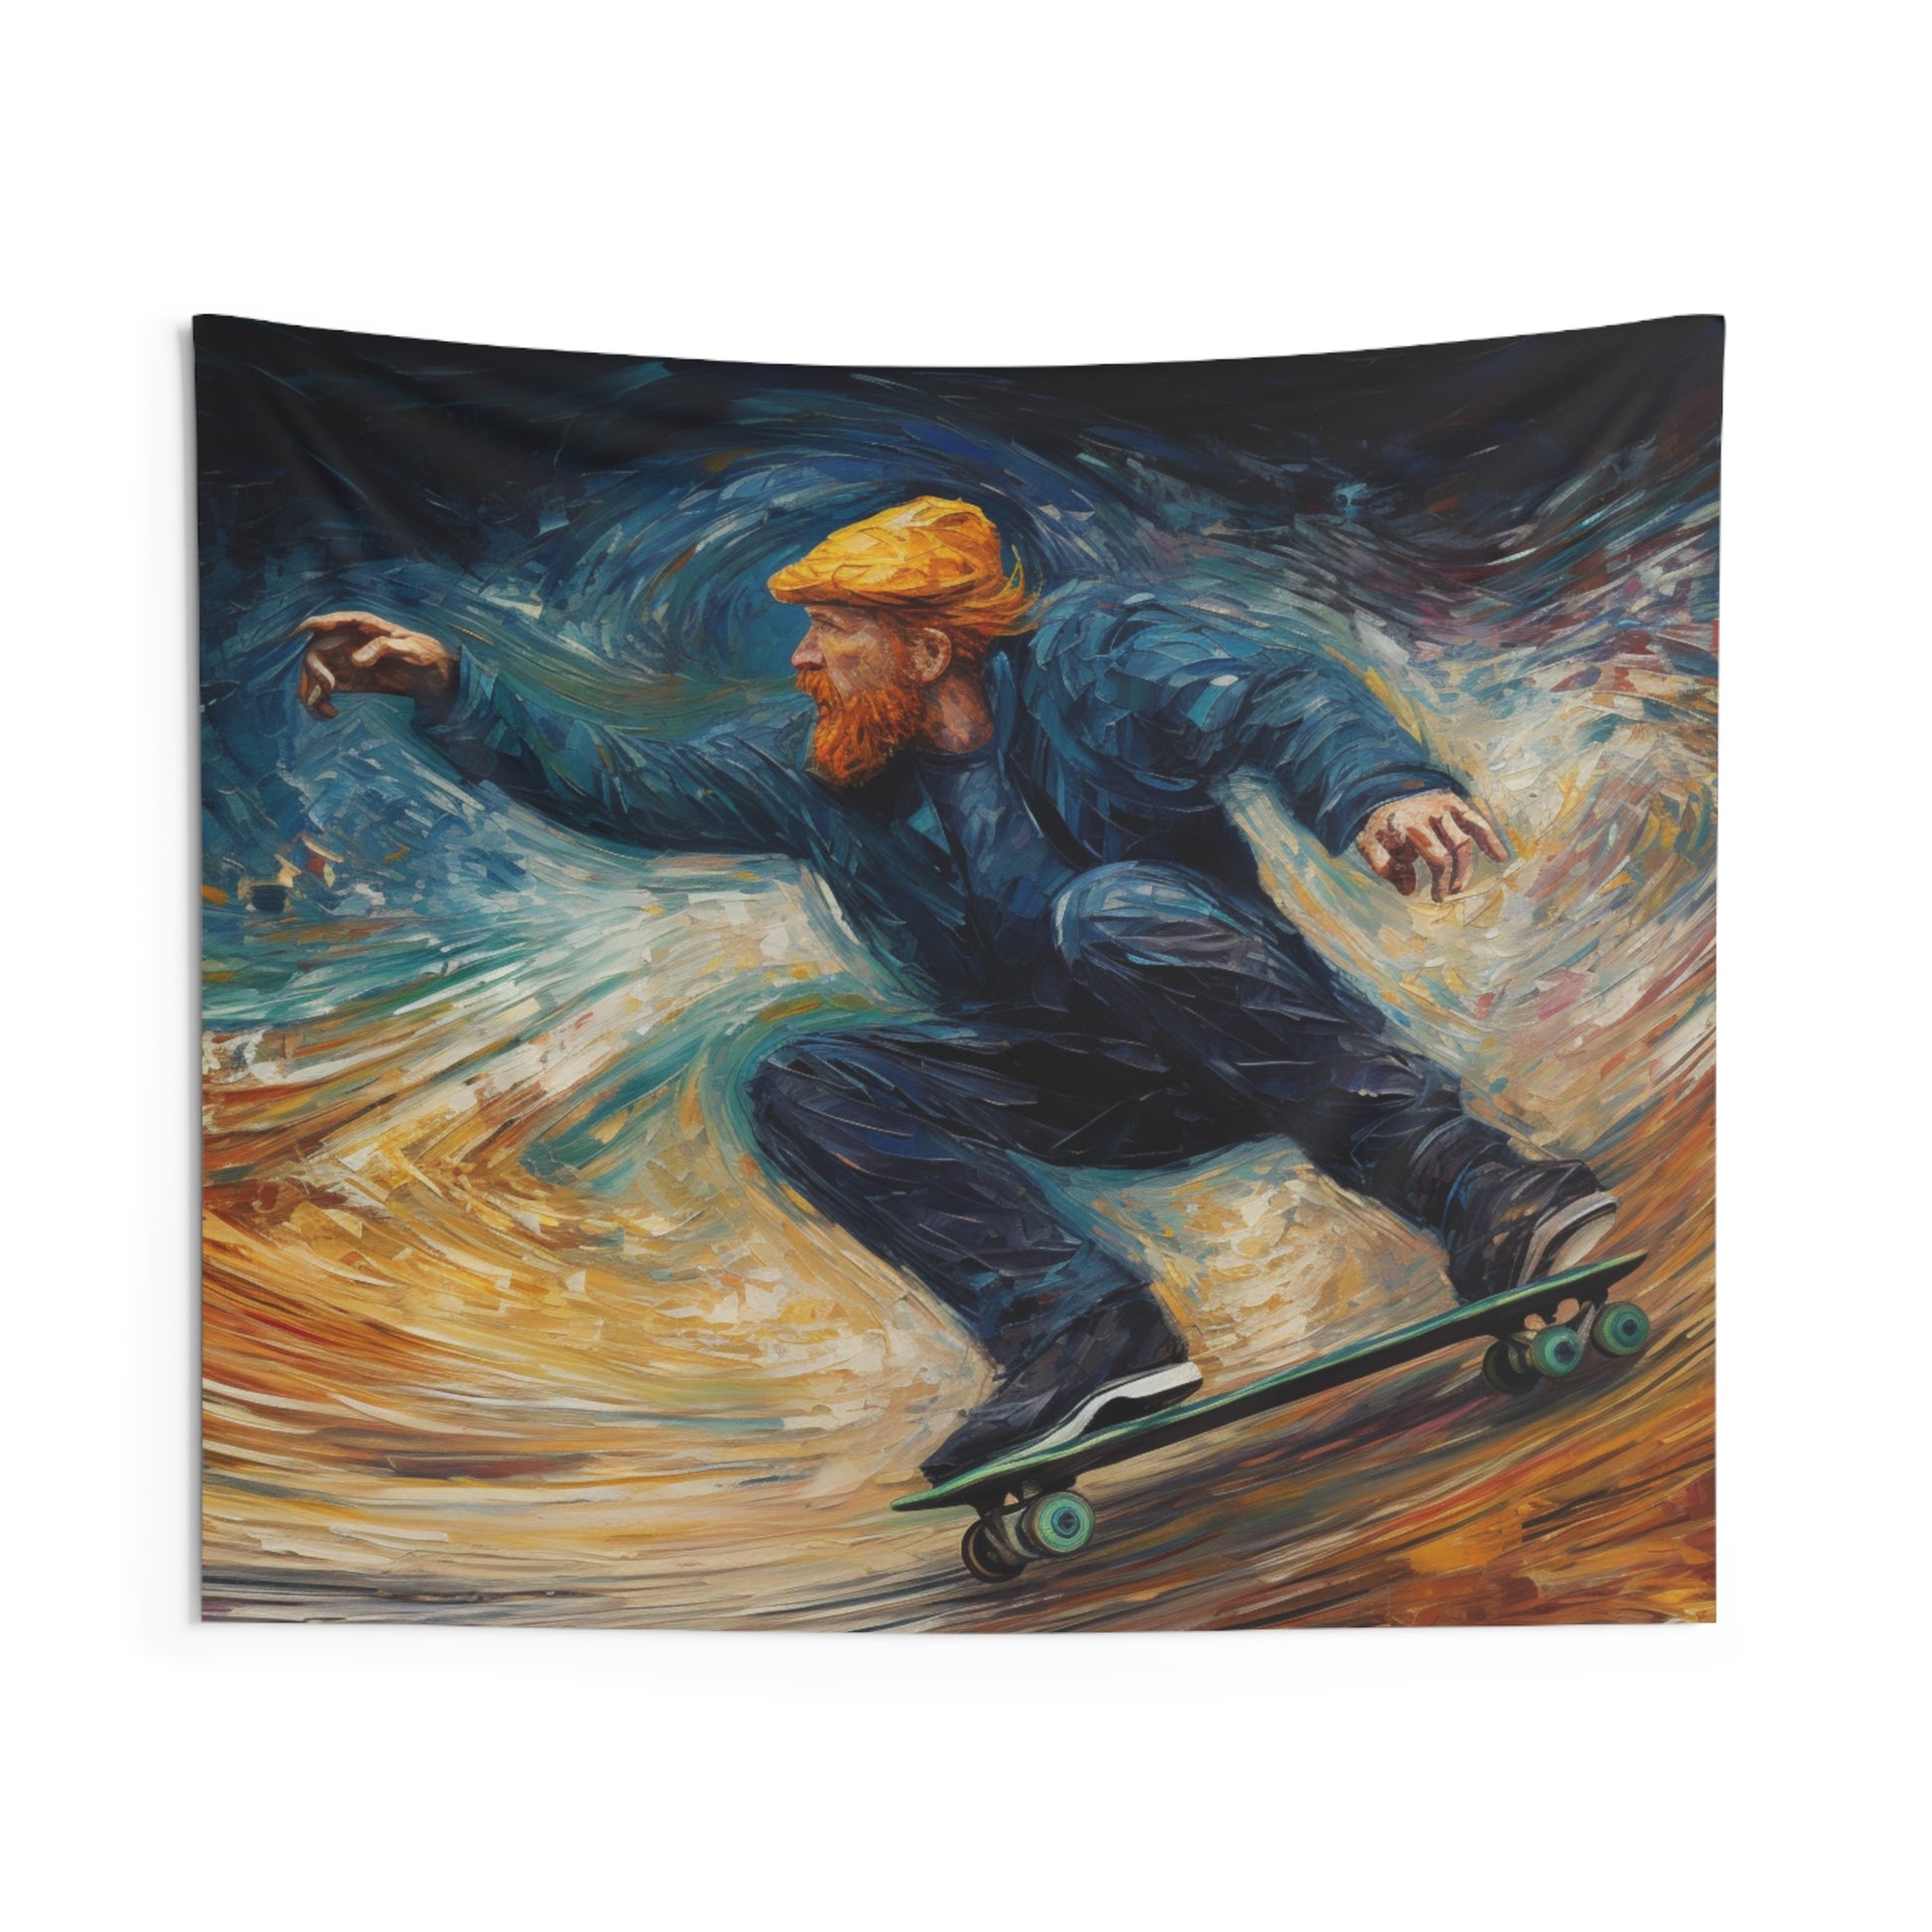 Skater Tapestry, Skateboard Skate Wall Art Hanging Cool Unique Landscape Aesthetic Large Small Decor Bedroom College Dorm Room Starcove Fashion